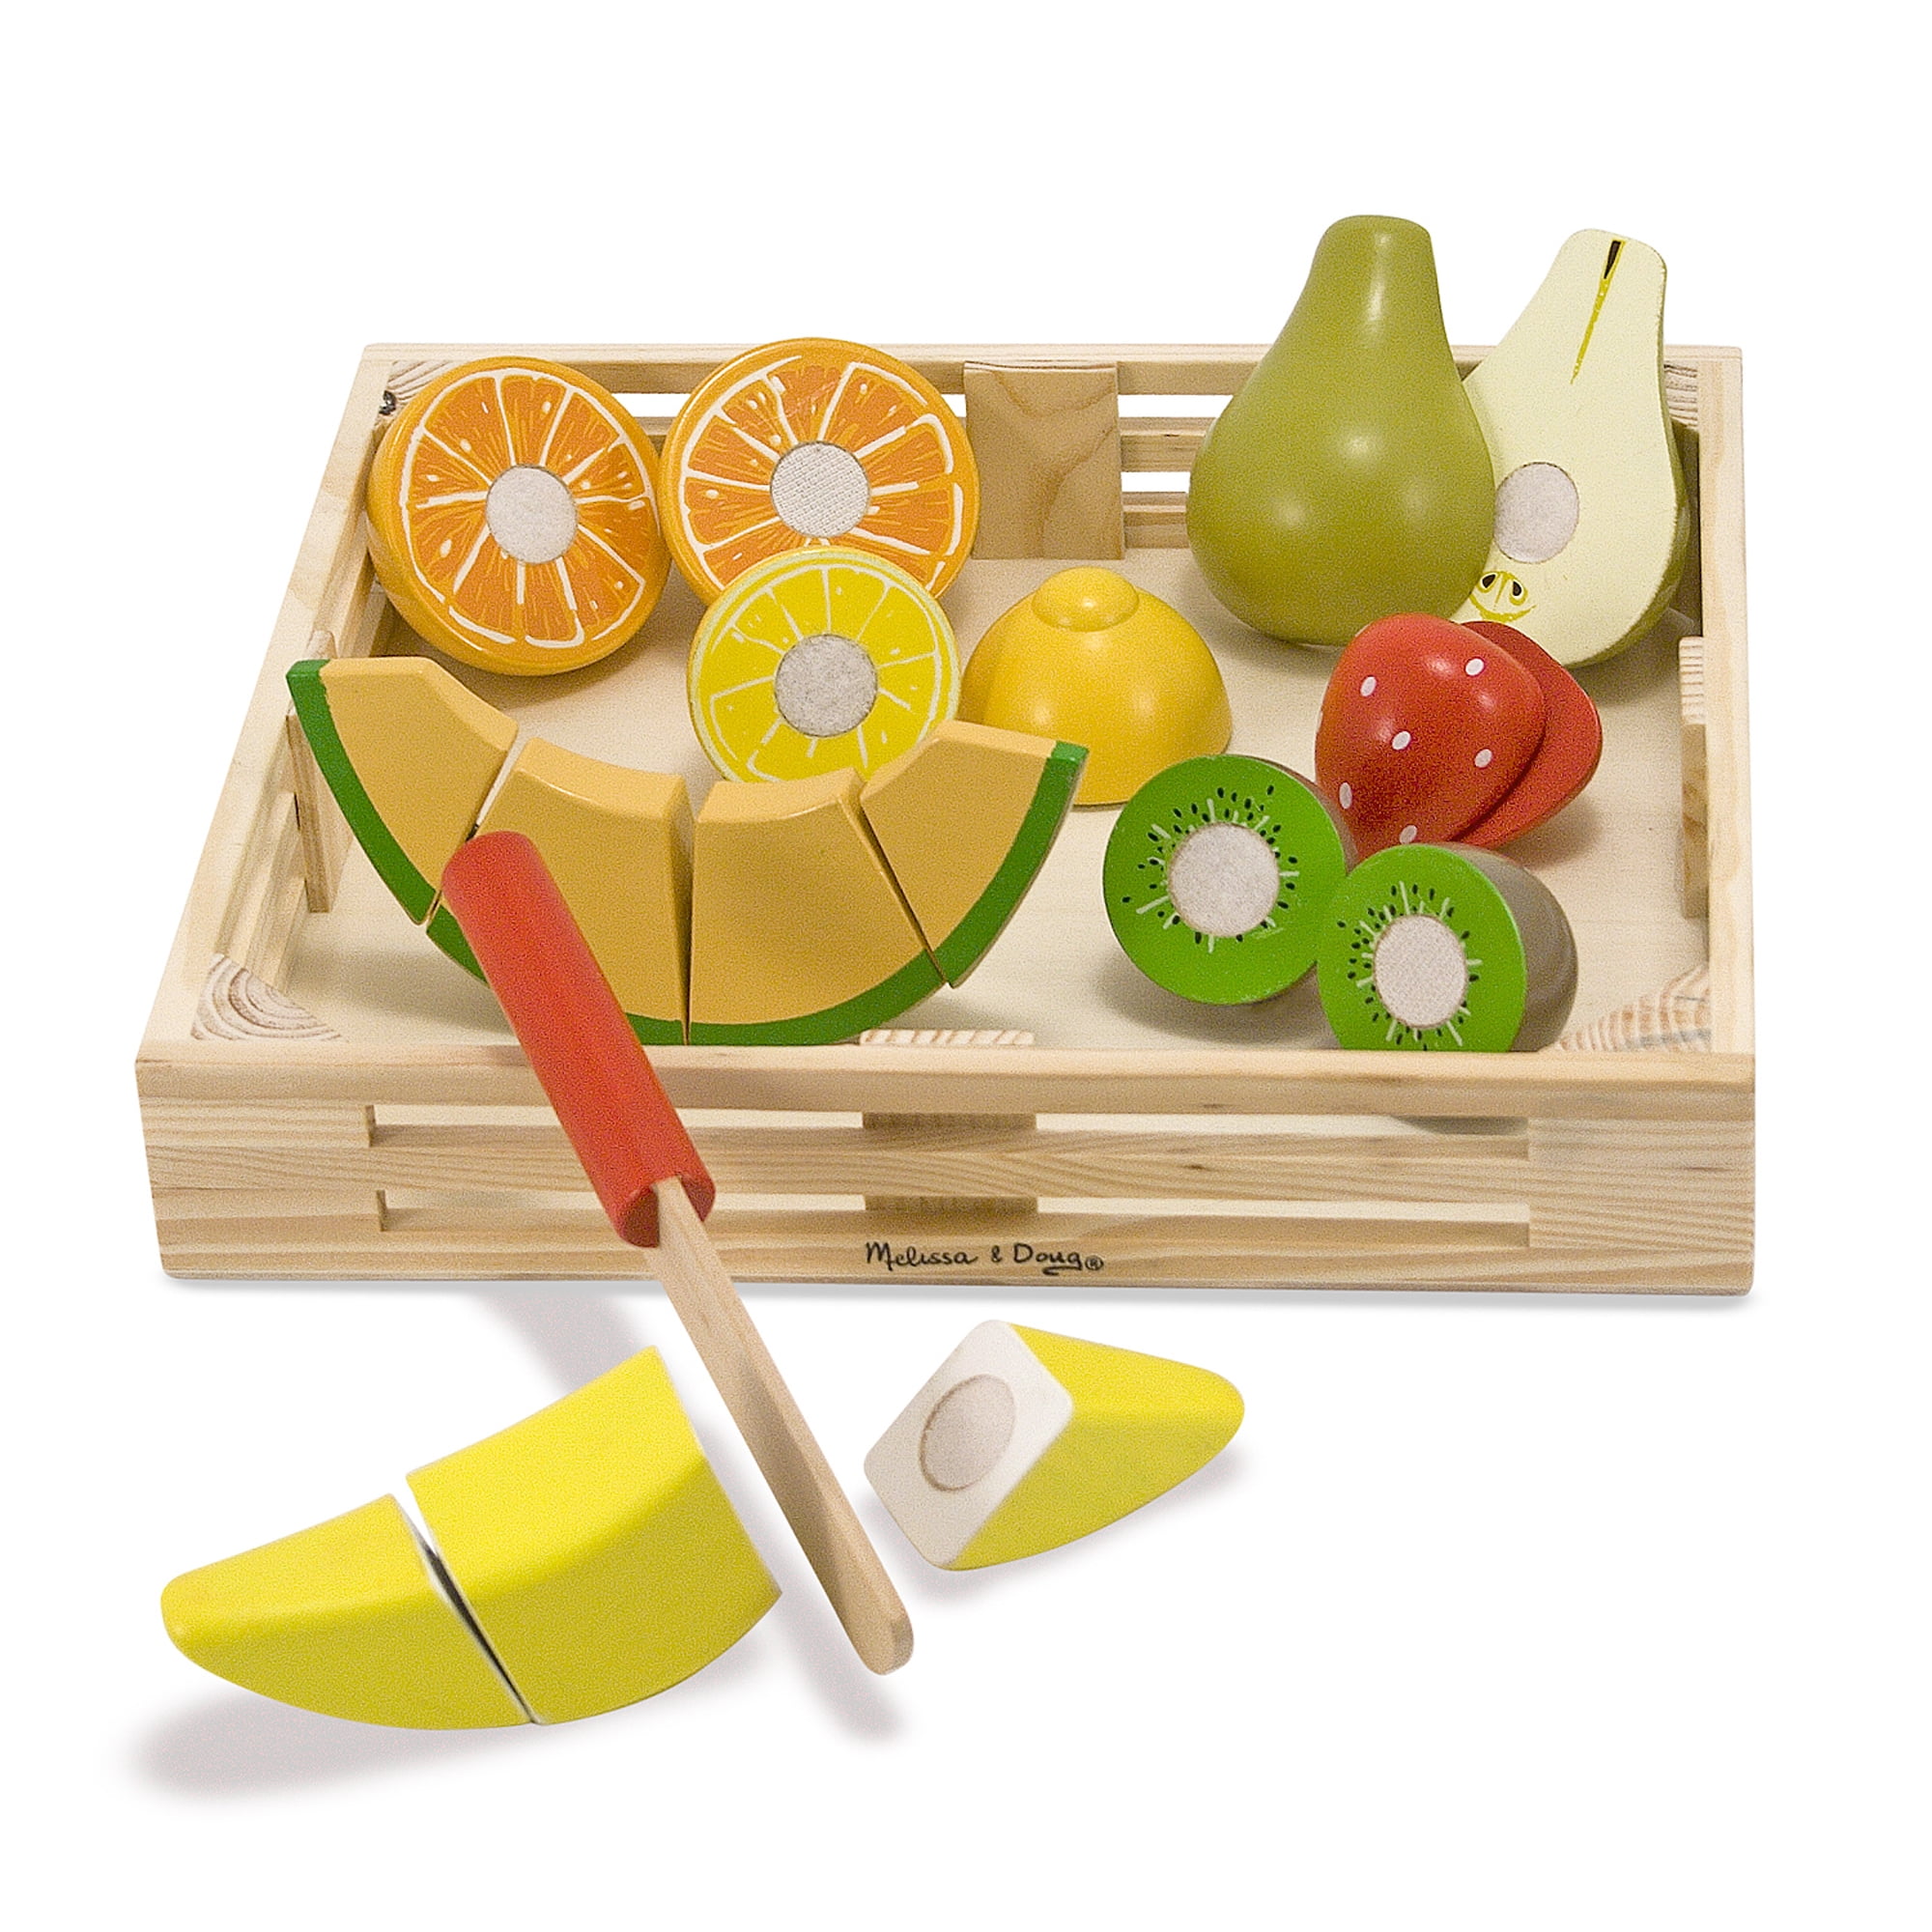 6X/set Kids Kitchen Fruit Vegetable Food Pretend Role Play Cutting ToyAffordabBS 